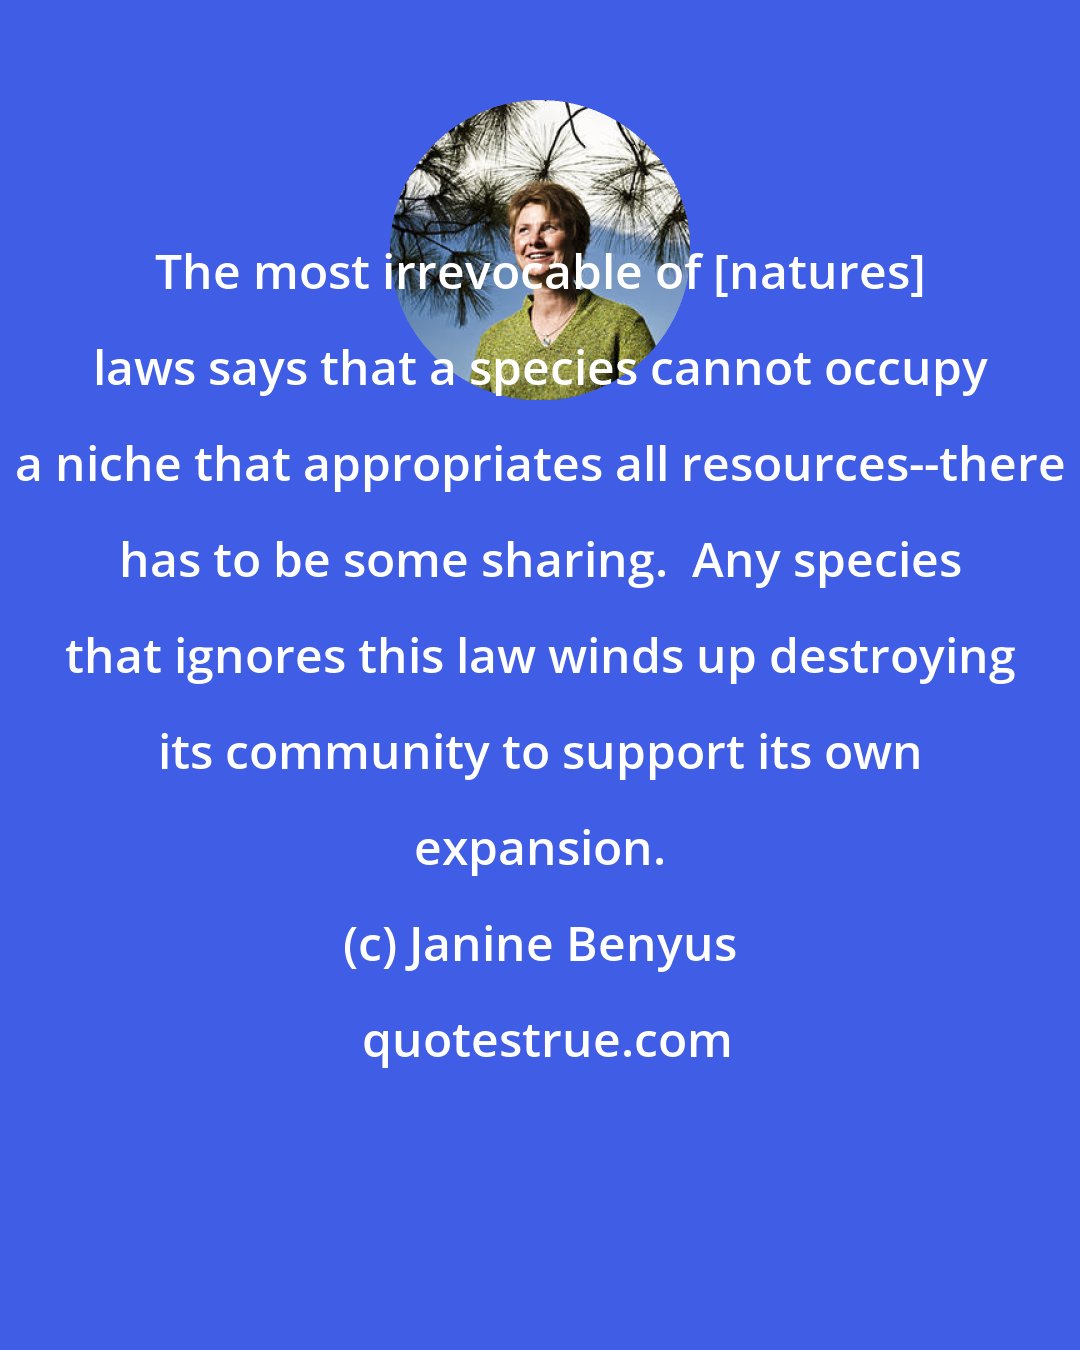 Janine Benyus: The most irrevocable of [natures] laws says that a species cannot occupy a niche that appropriates all resources--there has to be some sharing.  Any species that ignores this law winds up destroying its community to support its own expansion.